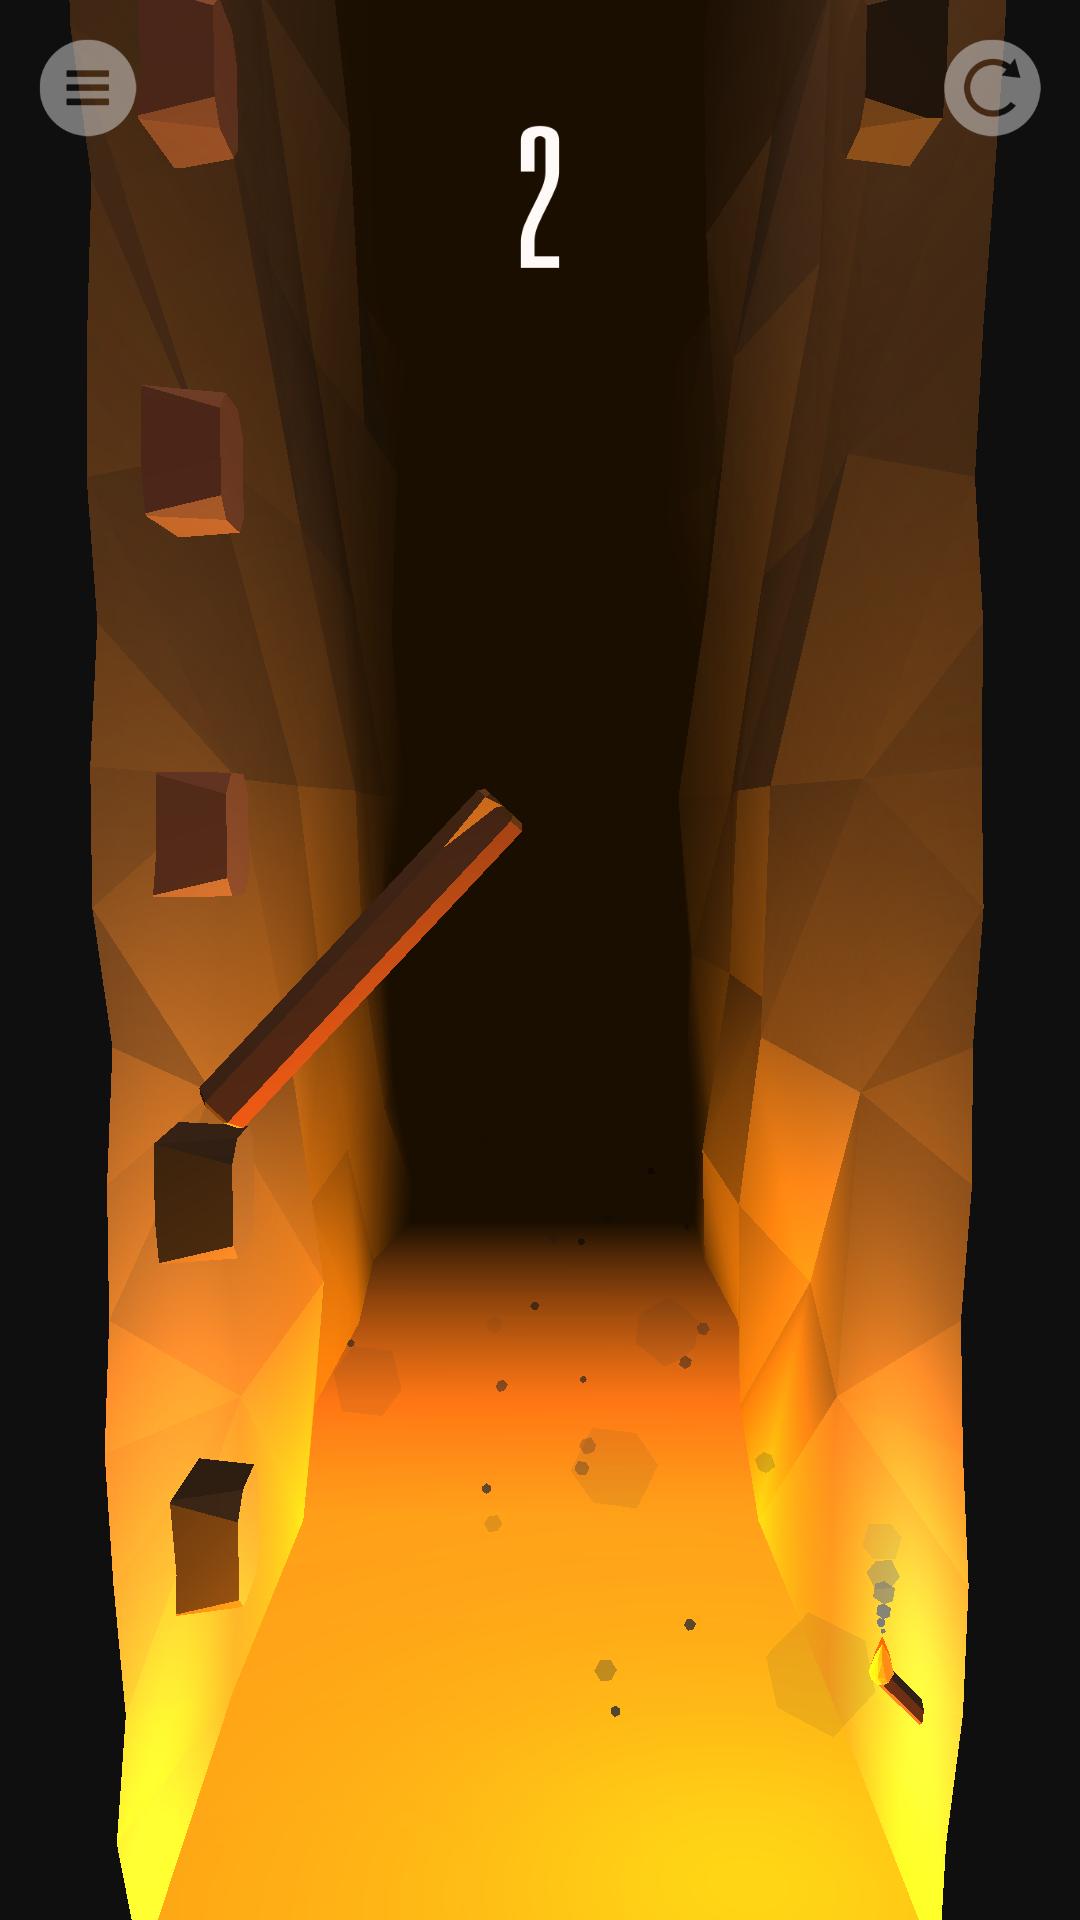 Купить a difficult game about climbing. Log down.